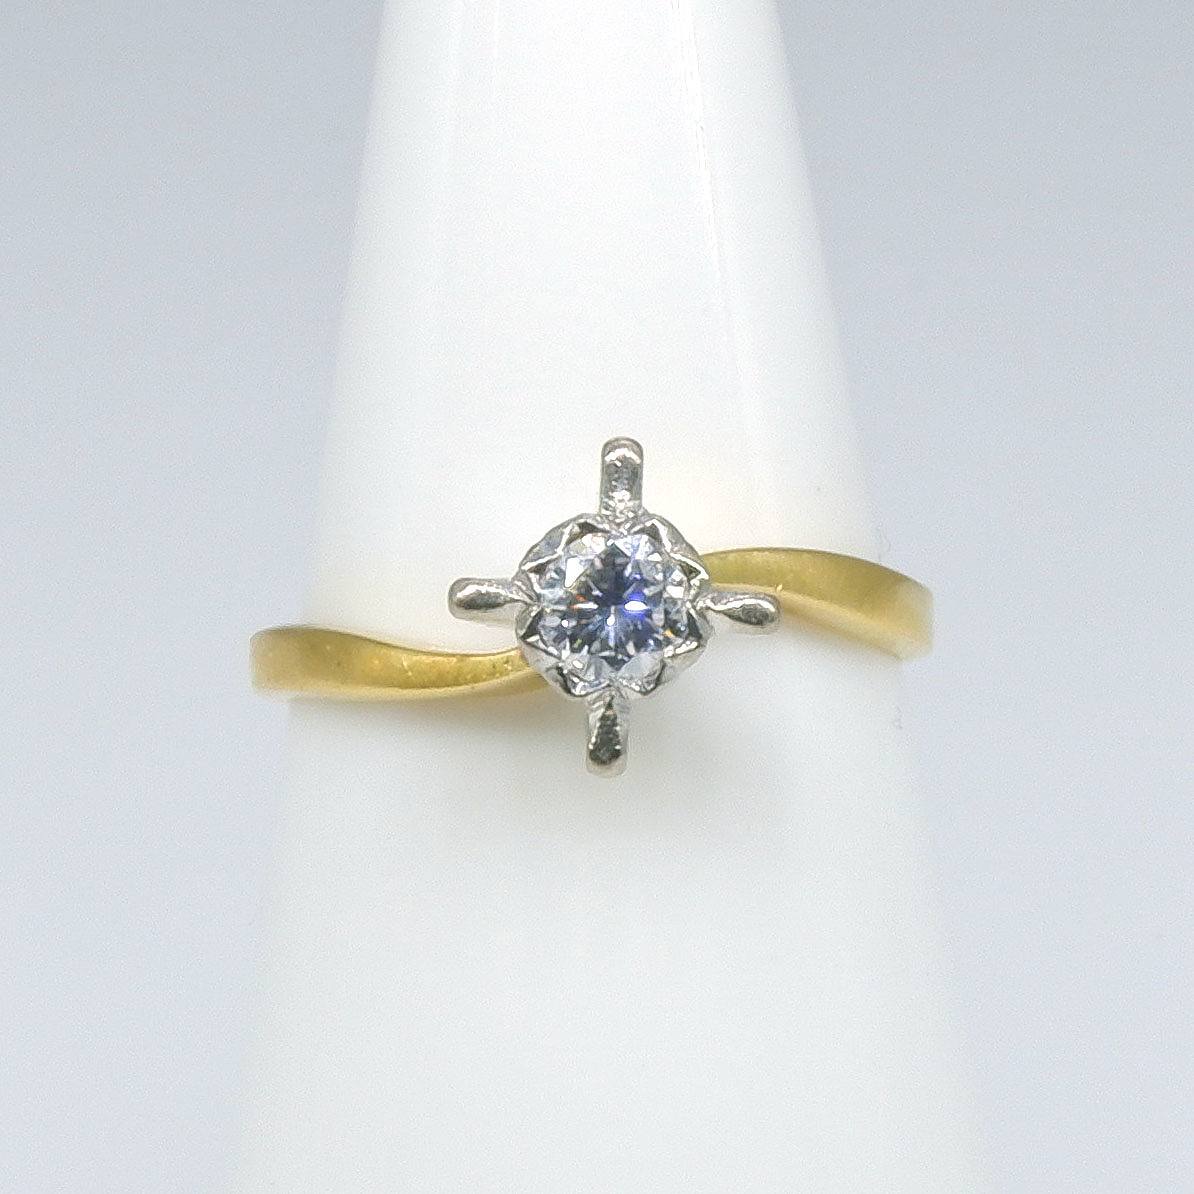 '18ct Yellow Gold and Platinum Ring with One Round Brilliant Cut Diamond'